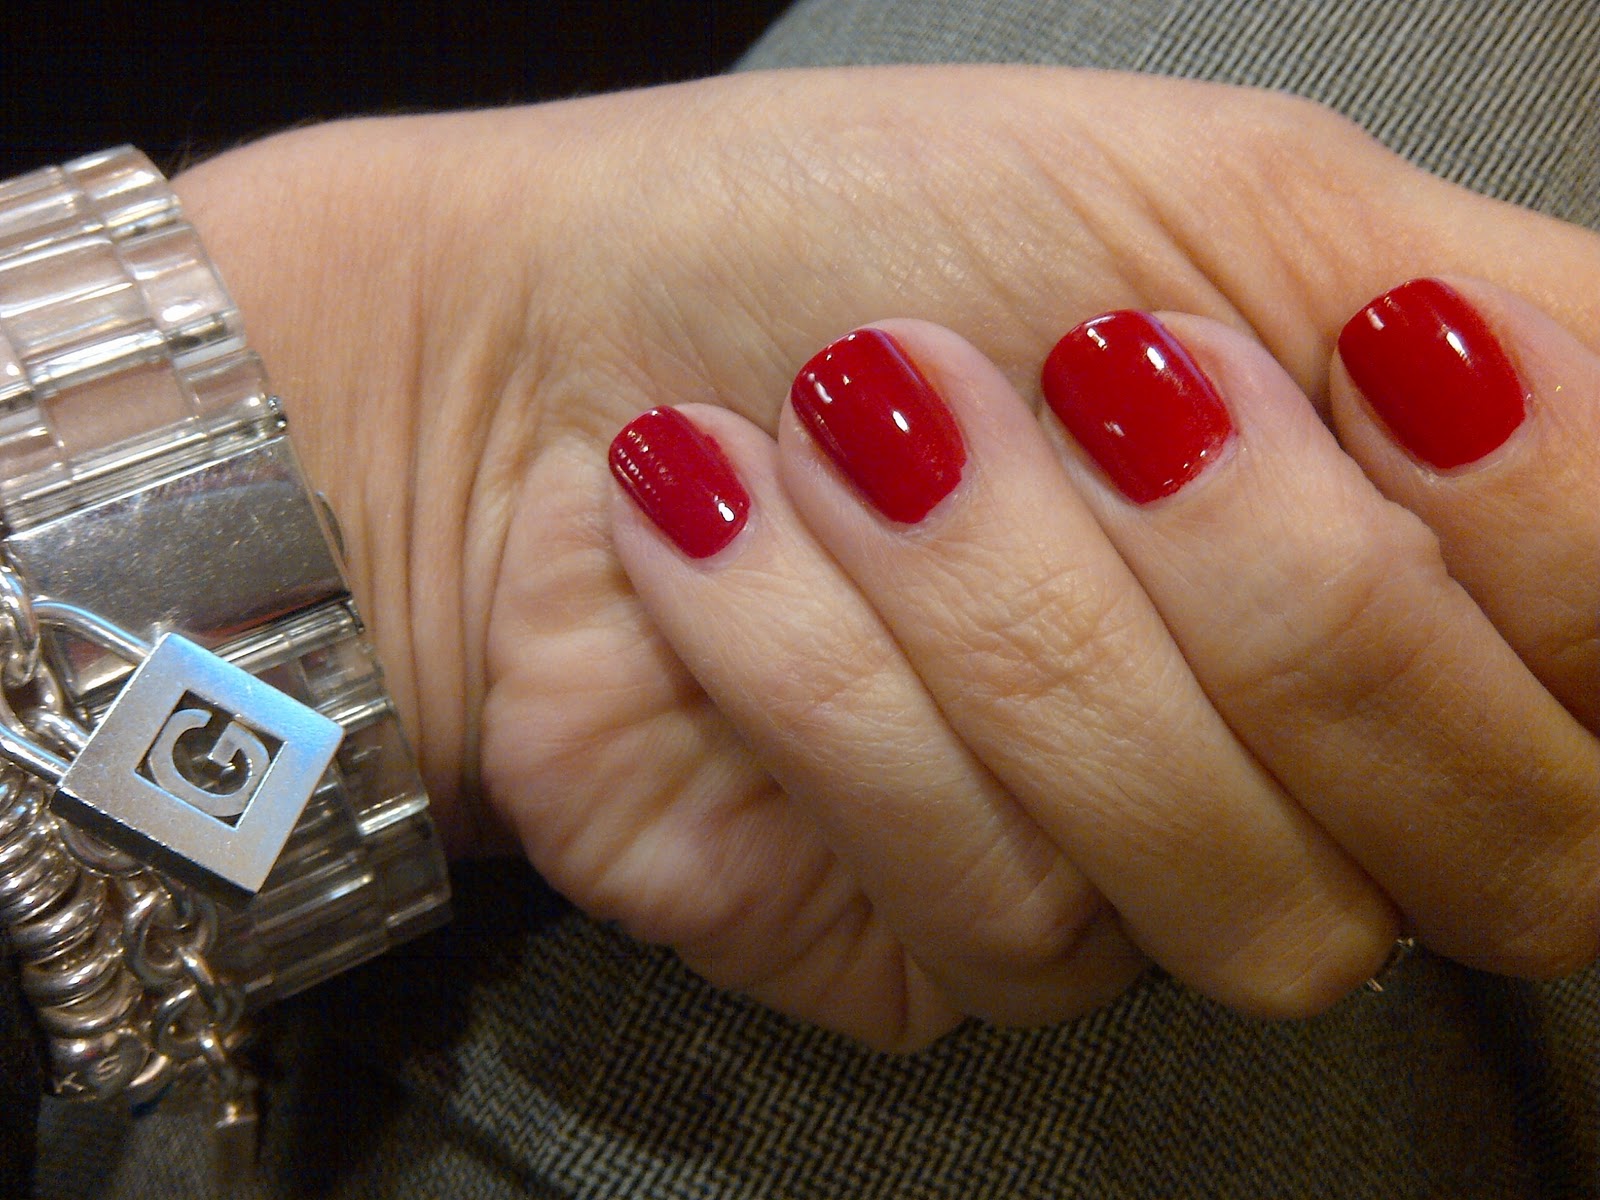 3. OPI Nail Lacquer - Big Apple Red - wide 11